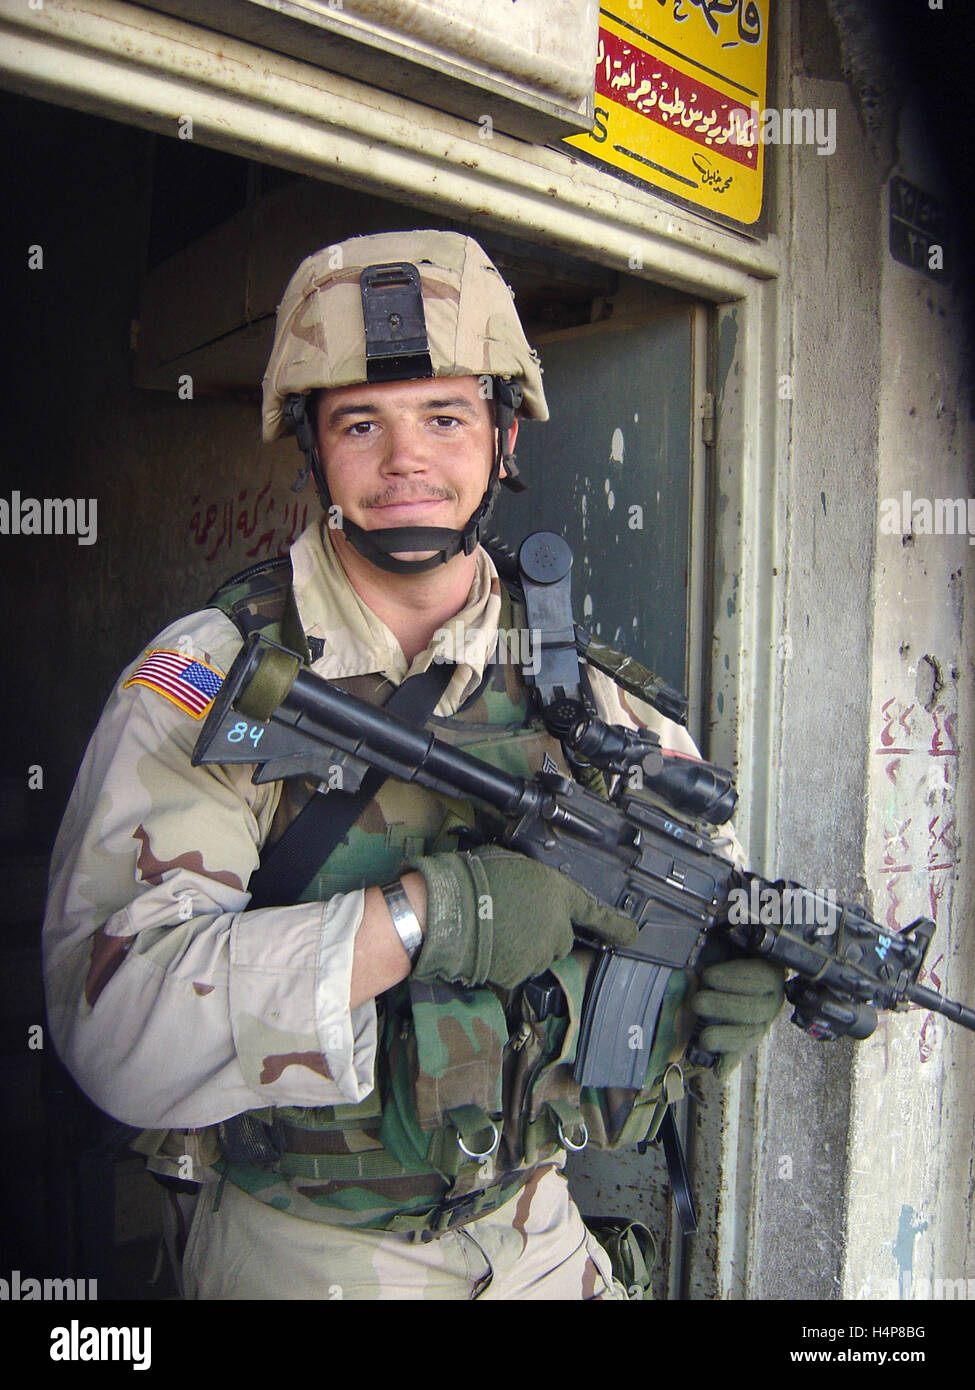 3rd December 2004 A U.S. Army soldier of the 1st Battalion, 24th Infantry Regiment, 'Deuce Four', on the streets of Mosul, Iraq. Stock Photo